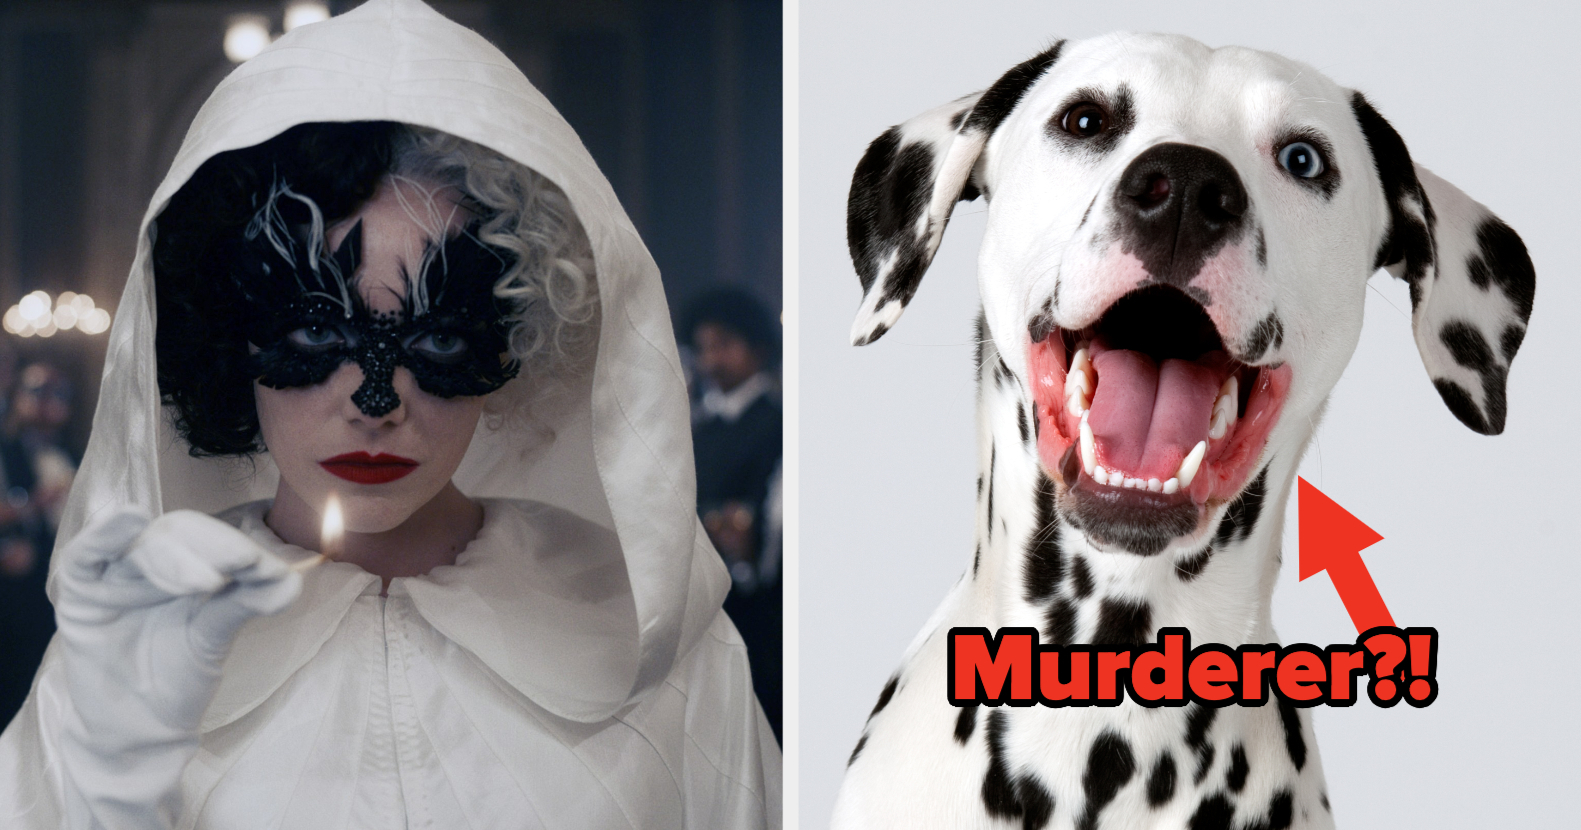 In Cruella (2021), Cruella De Vil kills all of her mother's husbands and  her mother herself because she is born evil and should not have a tragic  story. Also I didn't watch